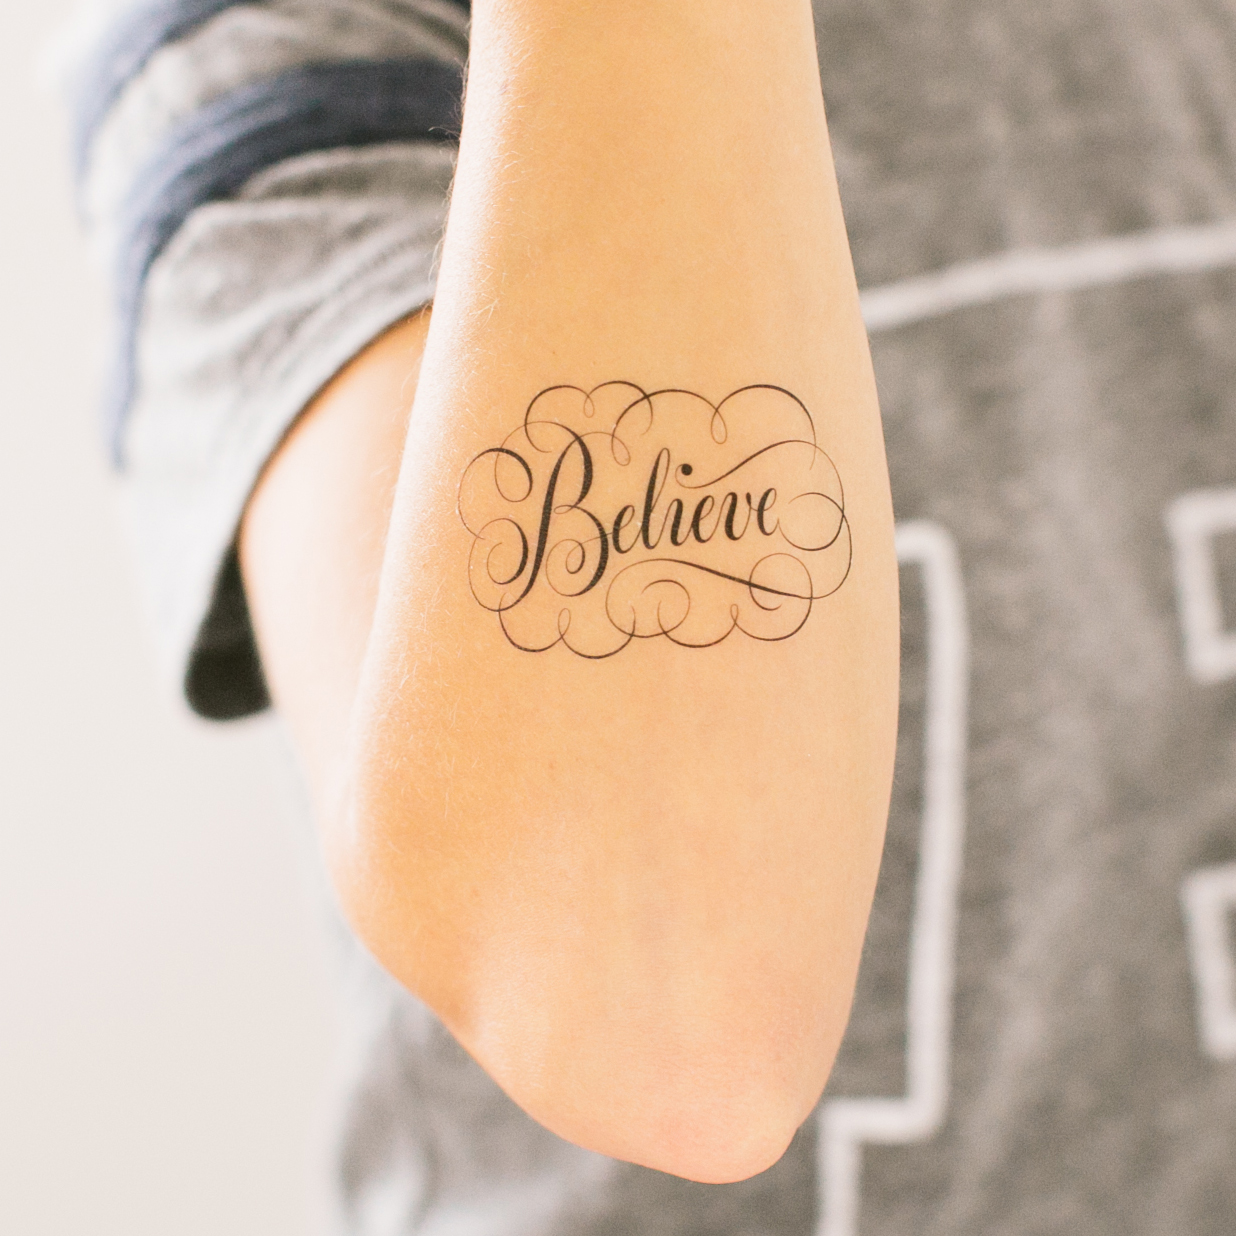 Looking for the font of my tattoo - done in 2009 I believe from dafont :  r/identifythisfont